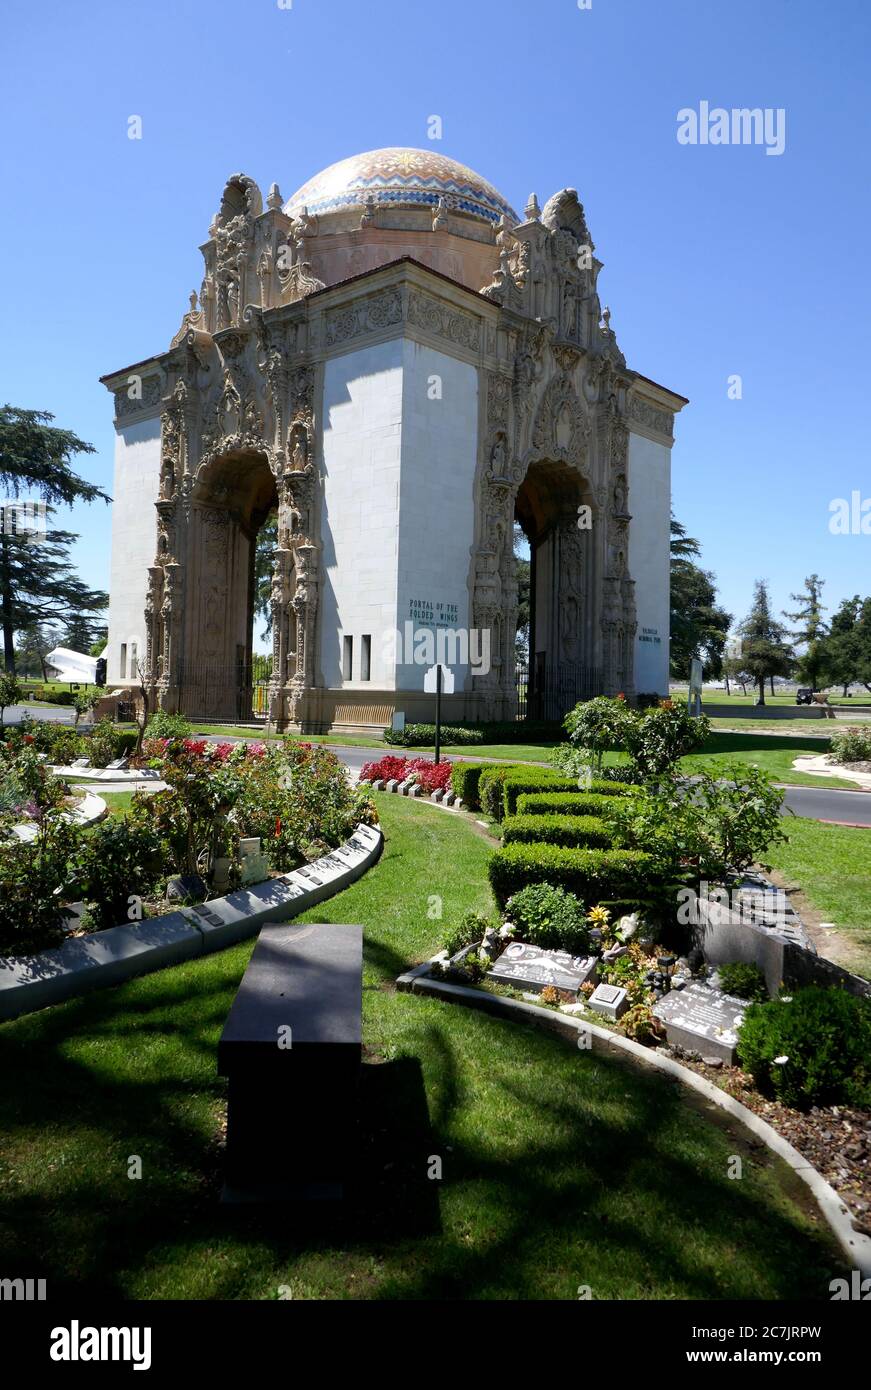 North Hollywood, California, USA 17th July 2020 A general view of atmosphere of Amelia Earhart Memorial at Portal of the Folded Wings Shrine to Aviation and Jon-Erik Hexum Cenotaph on July 17, 2020 at Valhalla Memorial Park in North Hollywood, California, USA. Photo by Barry King/Alamy Stock Photo Stock Photo